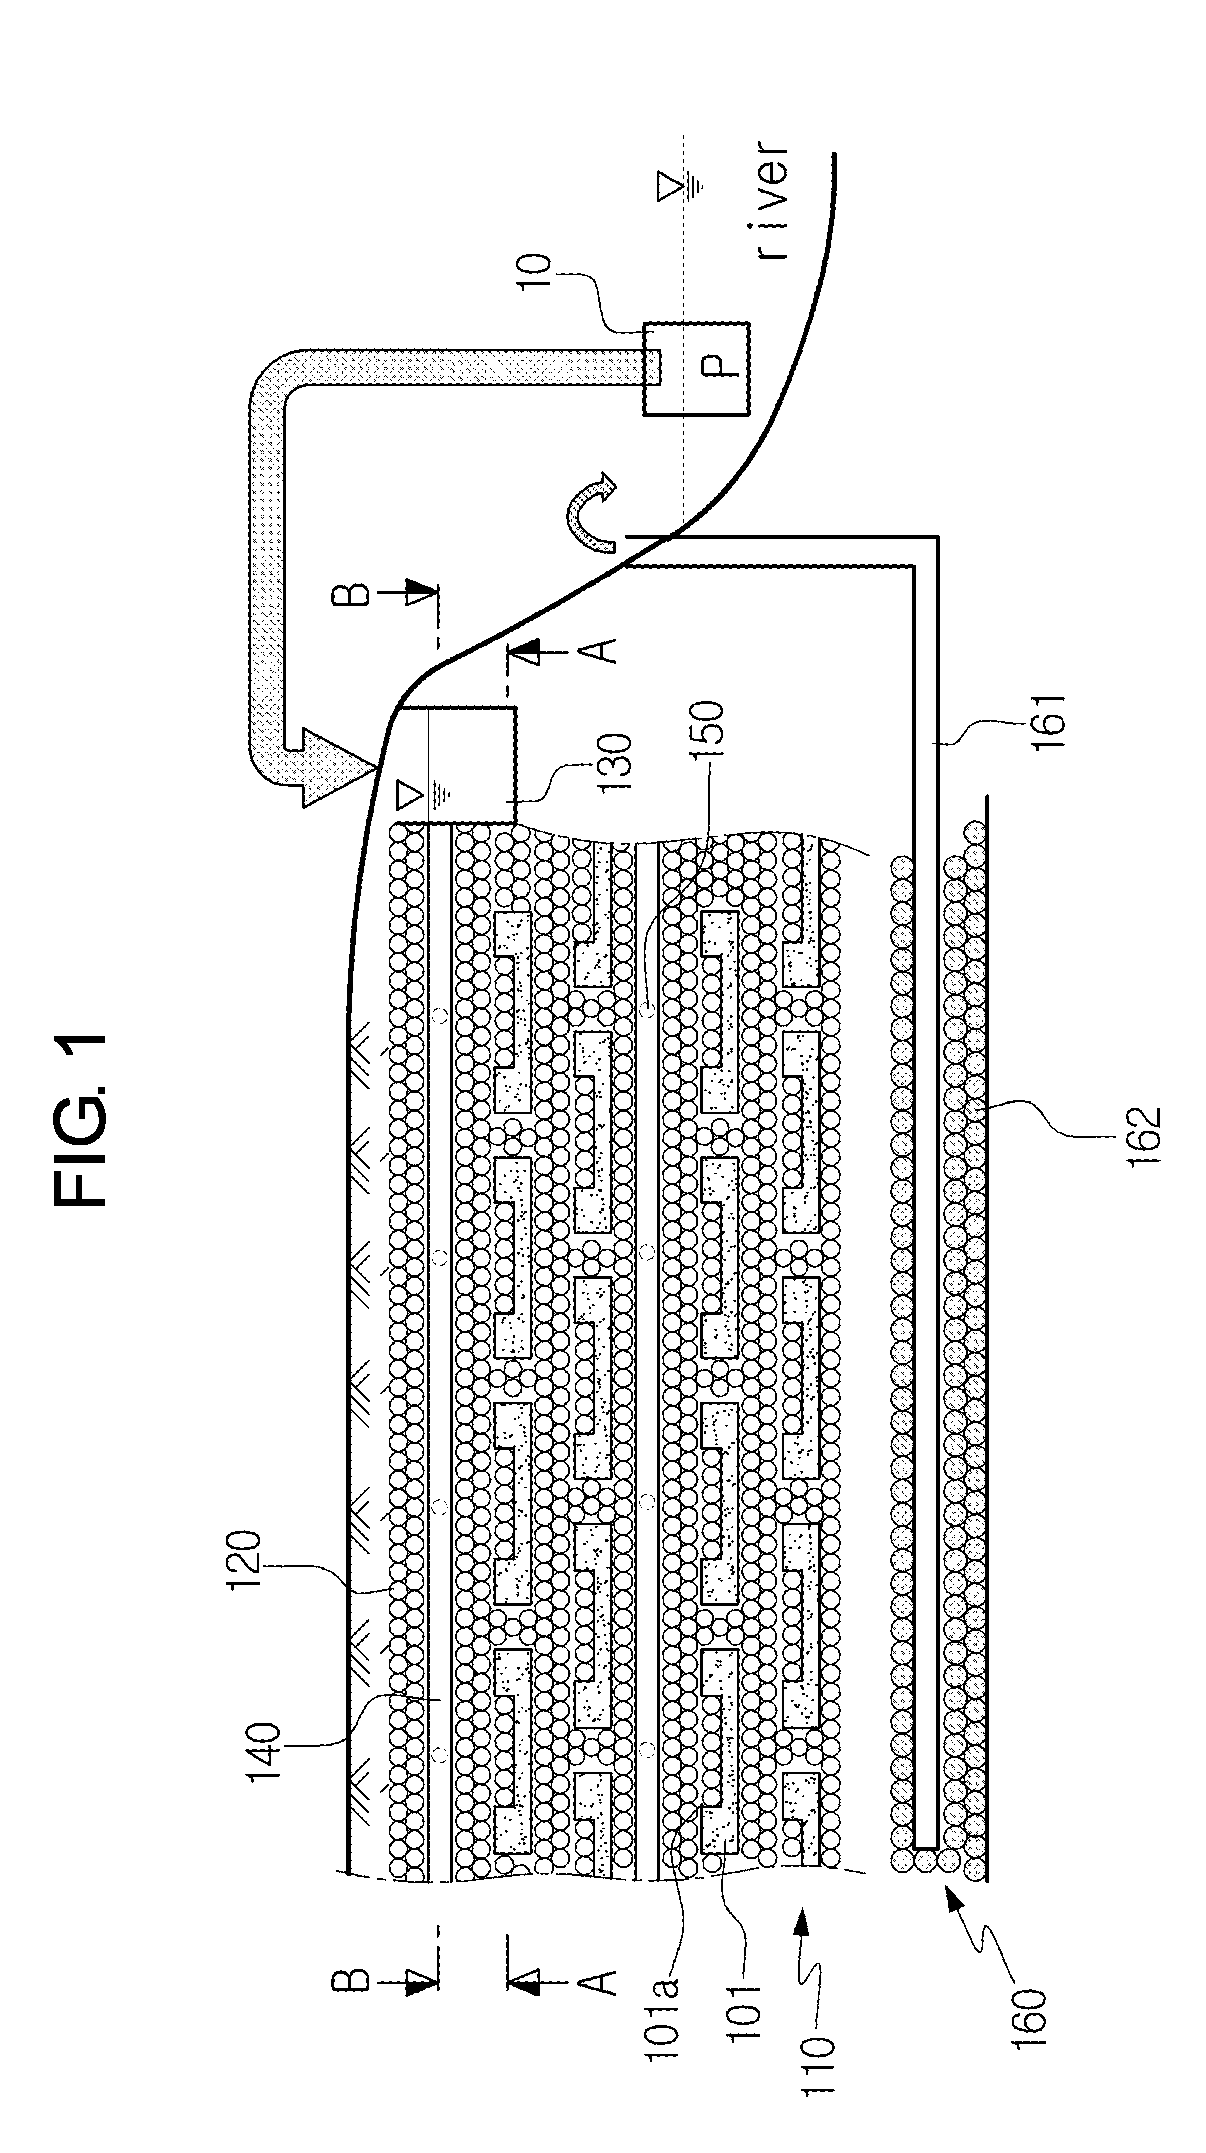 River water purification apparatus and method using treatment soil layer and permeable filtering medium layer